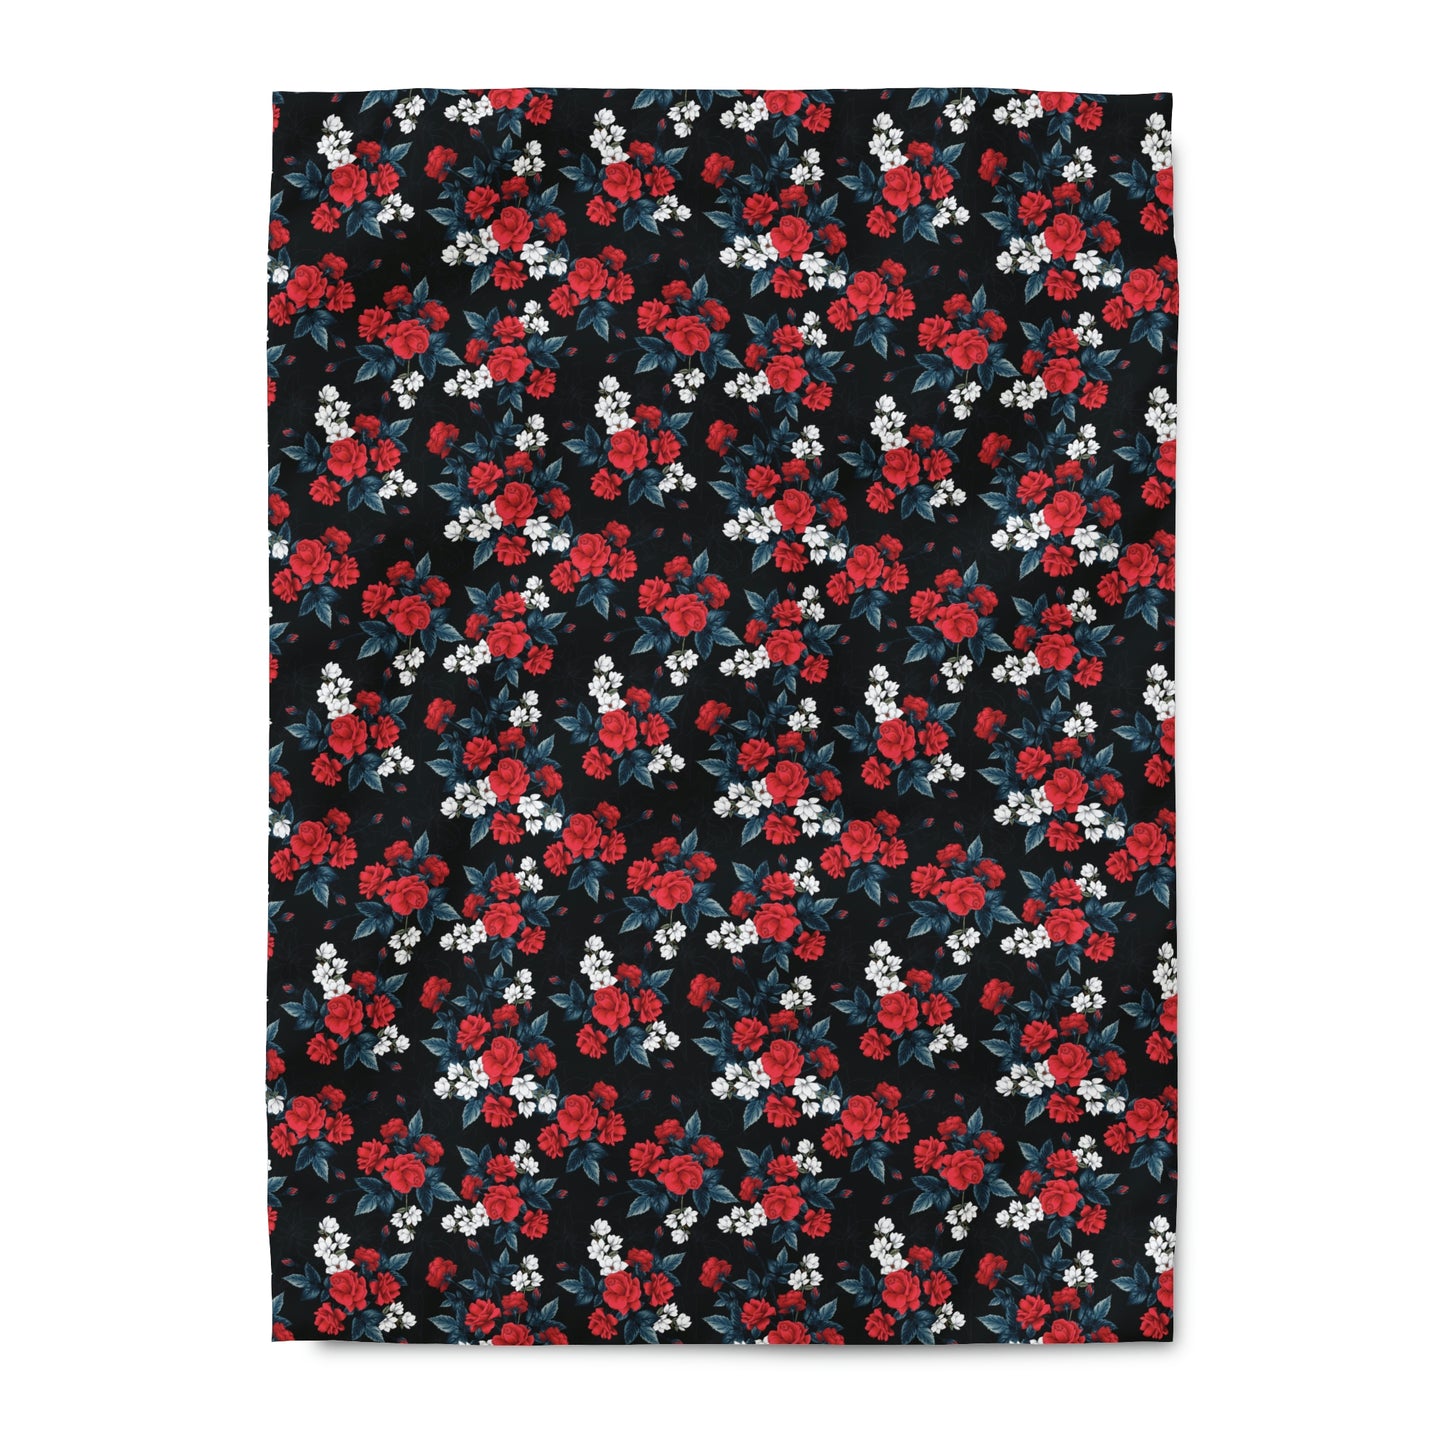 Black and Red Rose Floral Pattern Duvet Cover lying on a bed, microfiber duvet cover bedroom accent